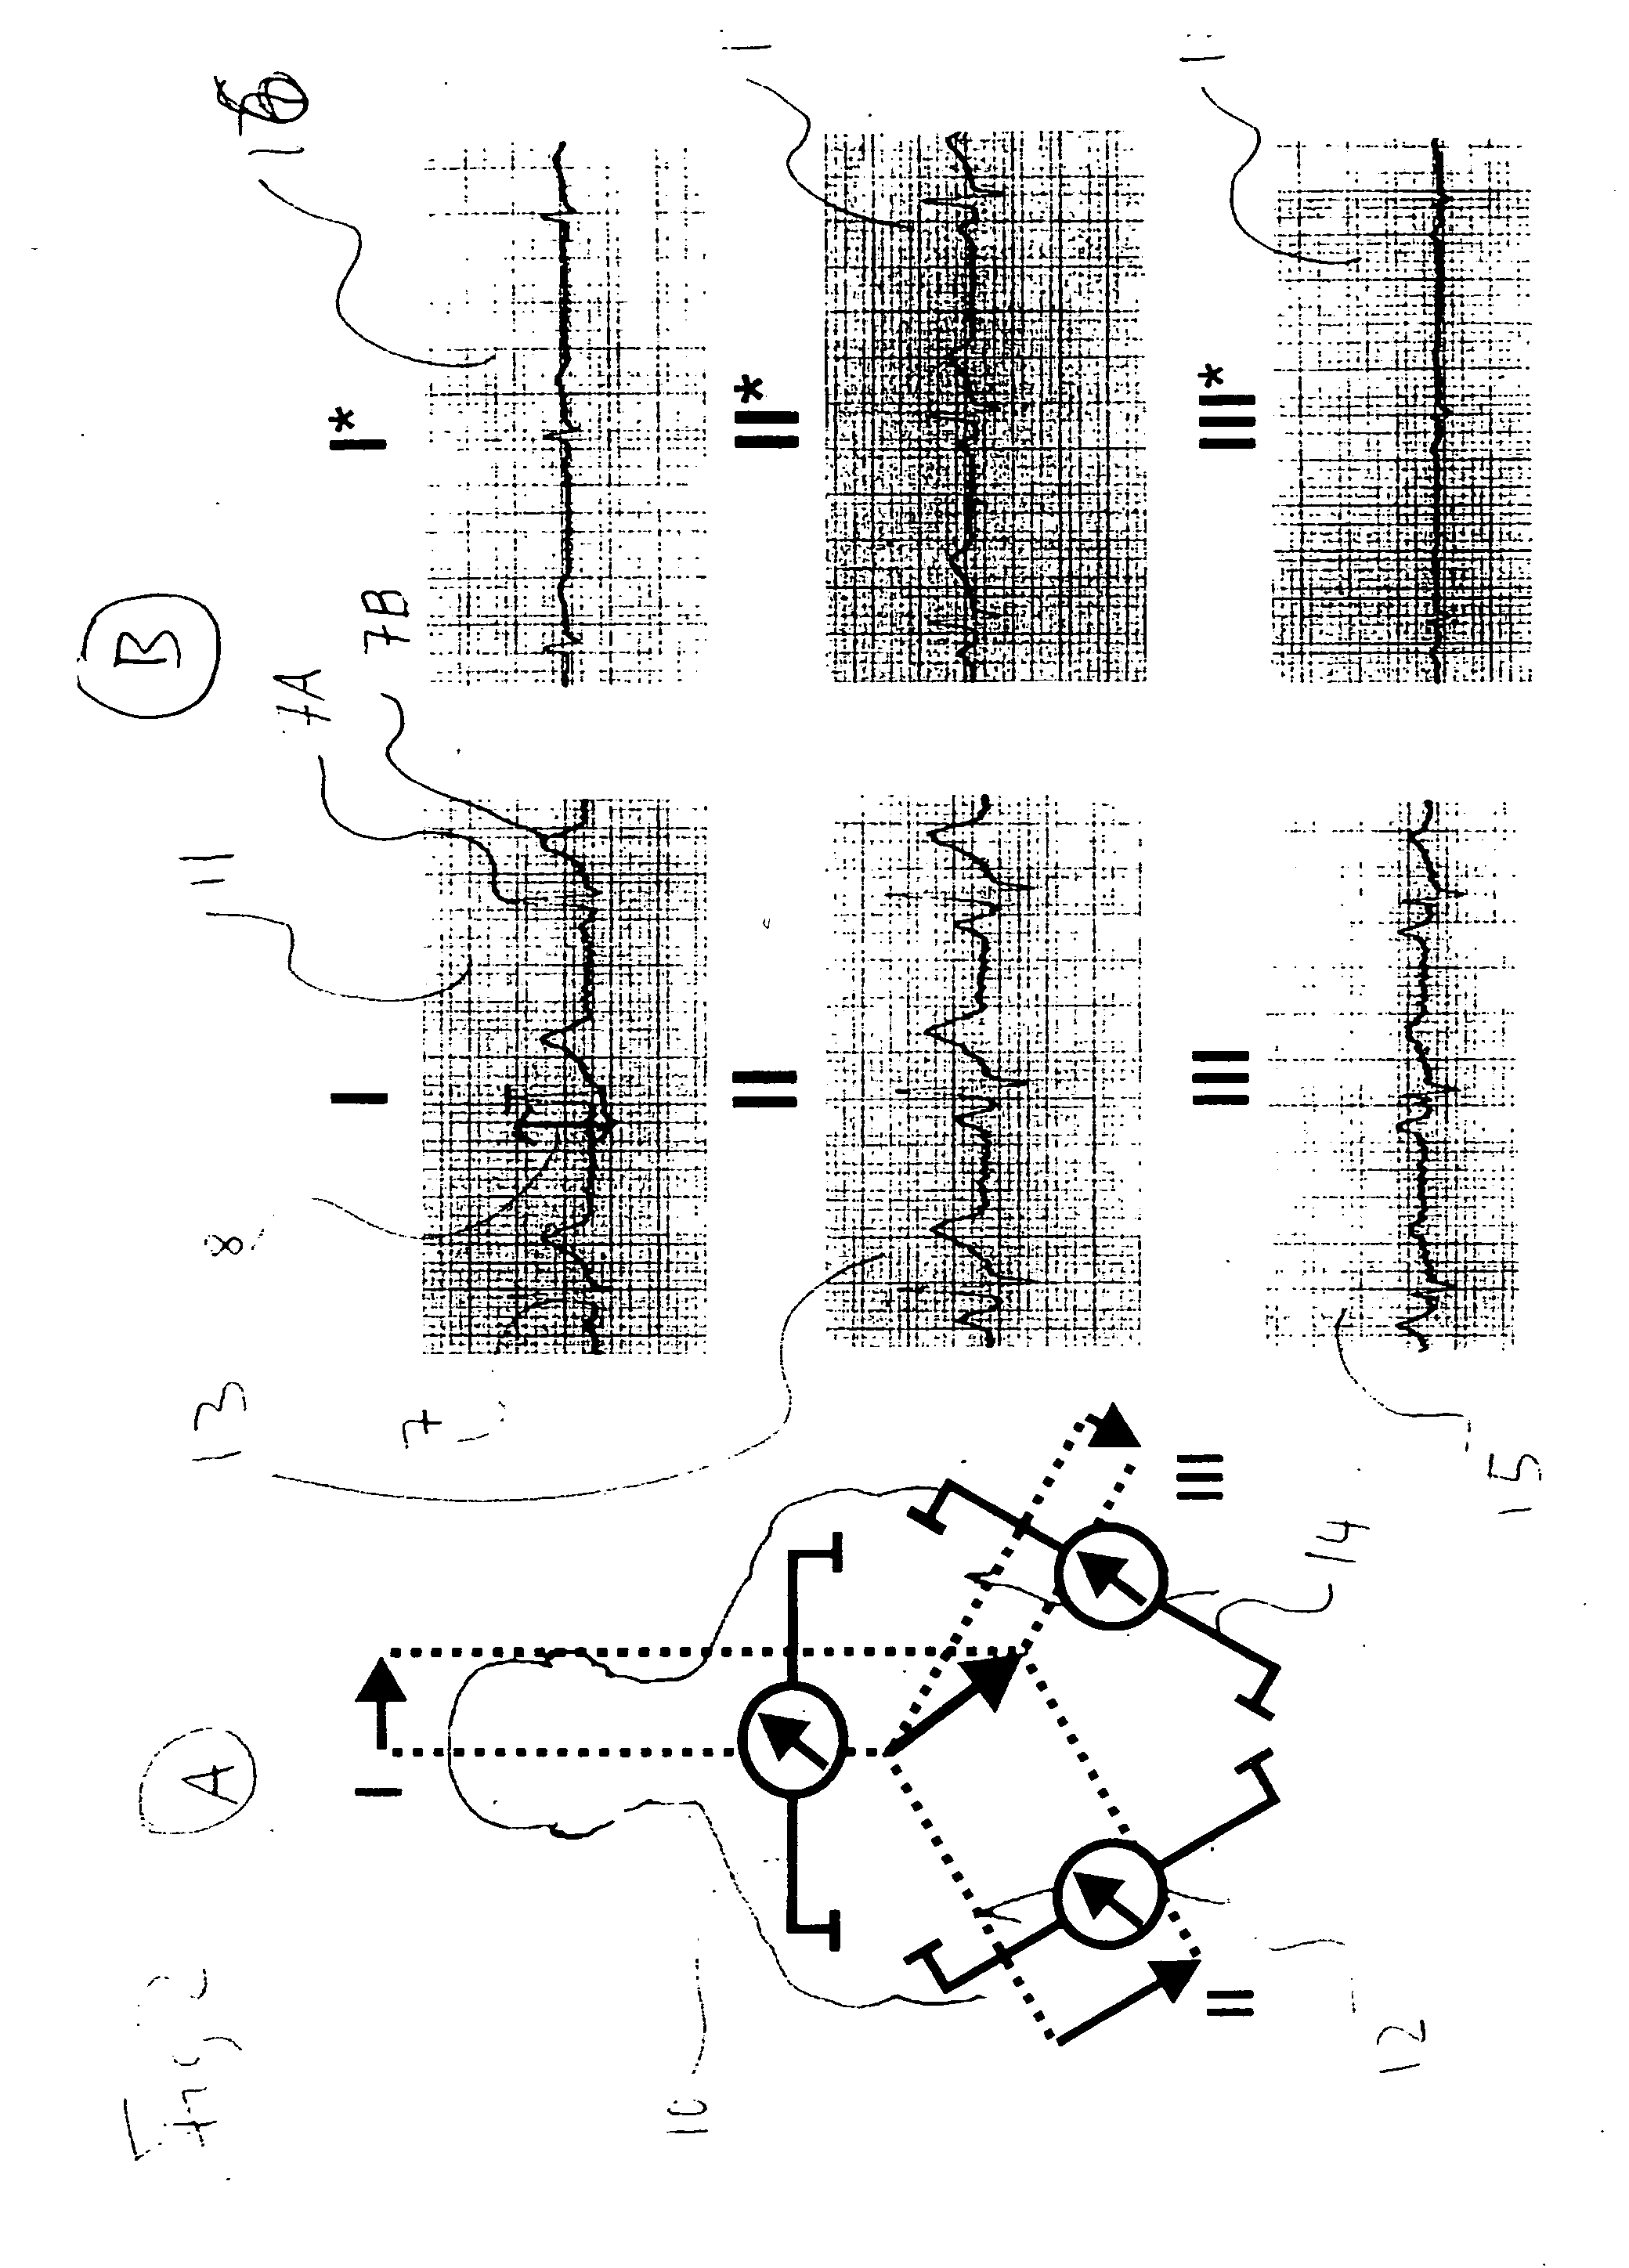 Method and device for using impedance measurements based on electrical energy of the heart